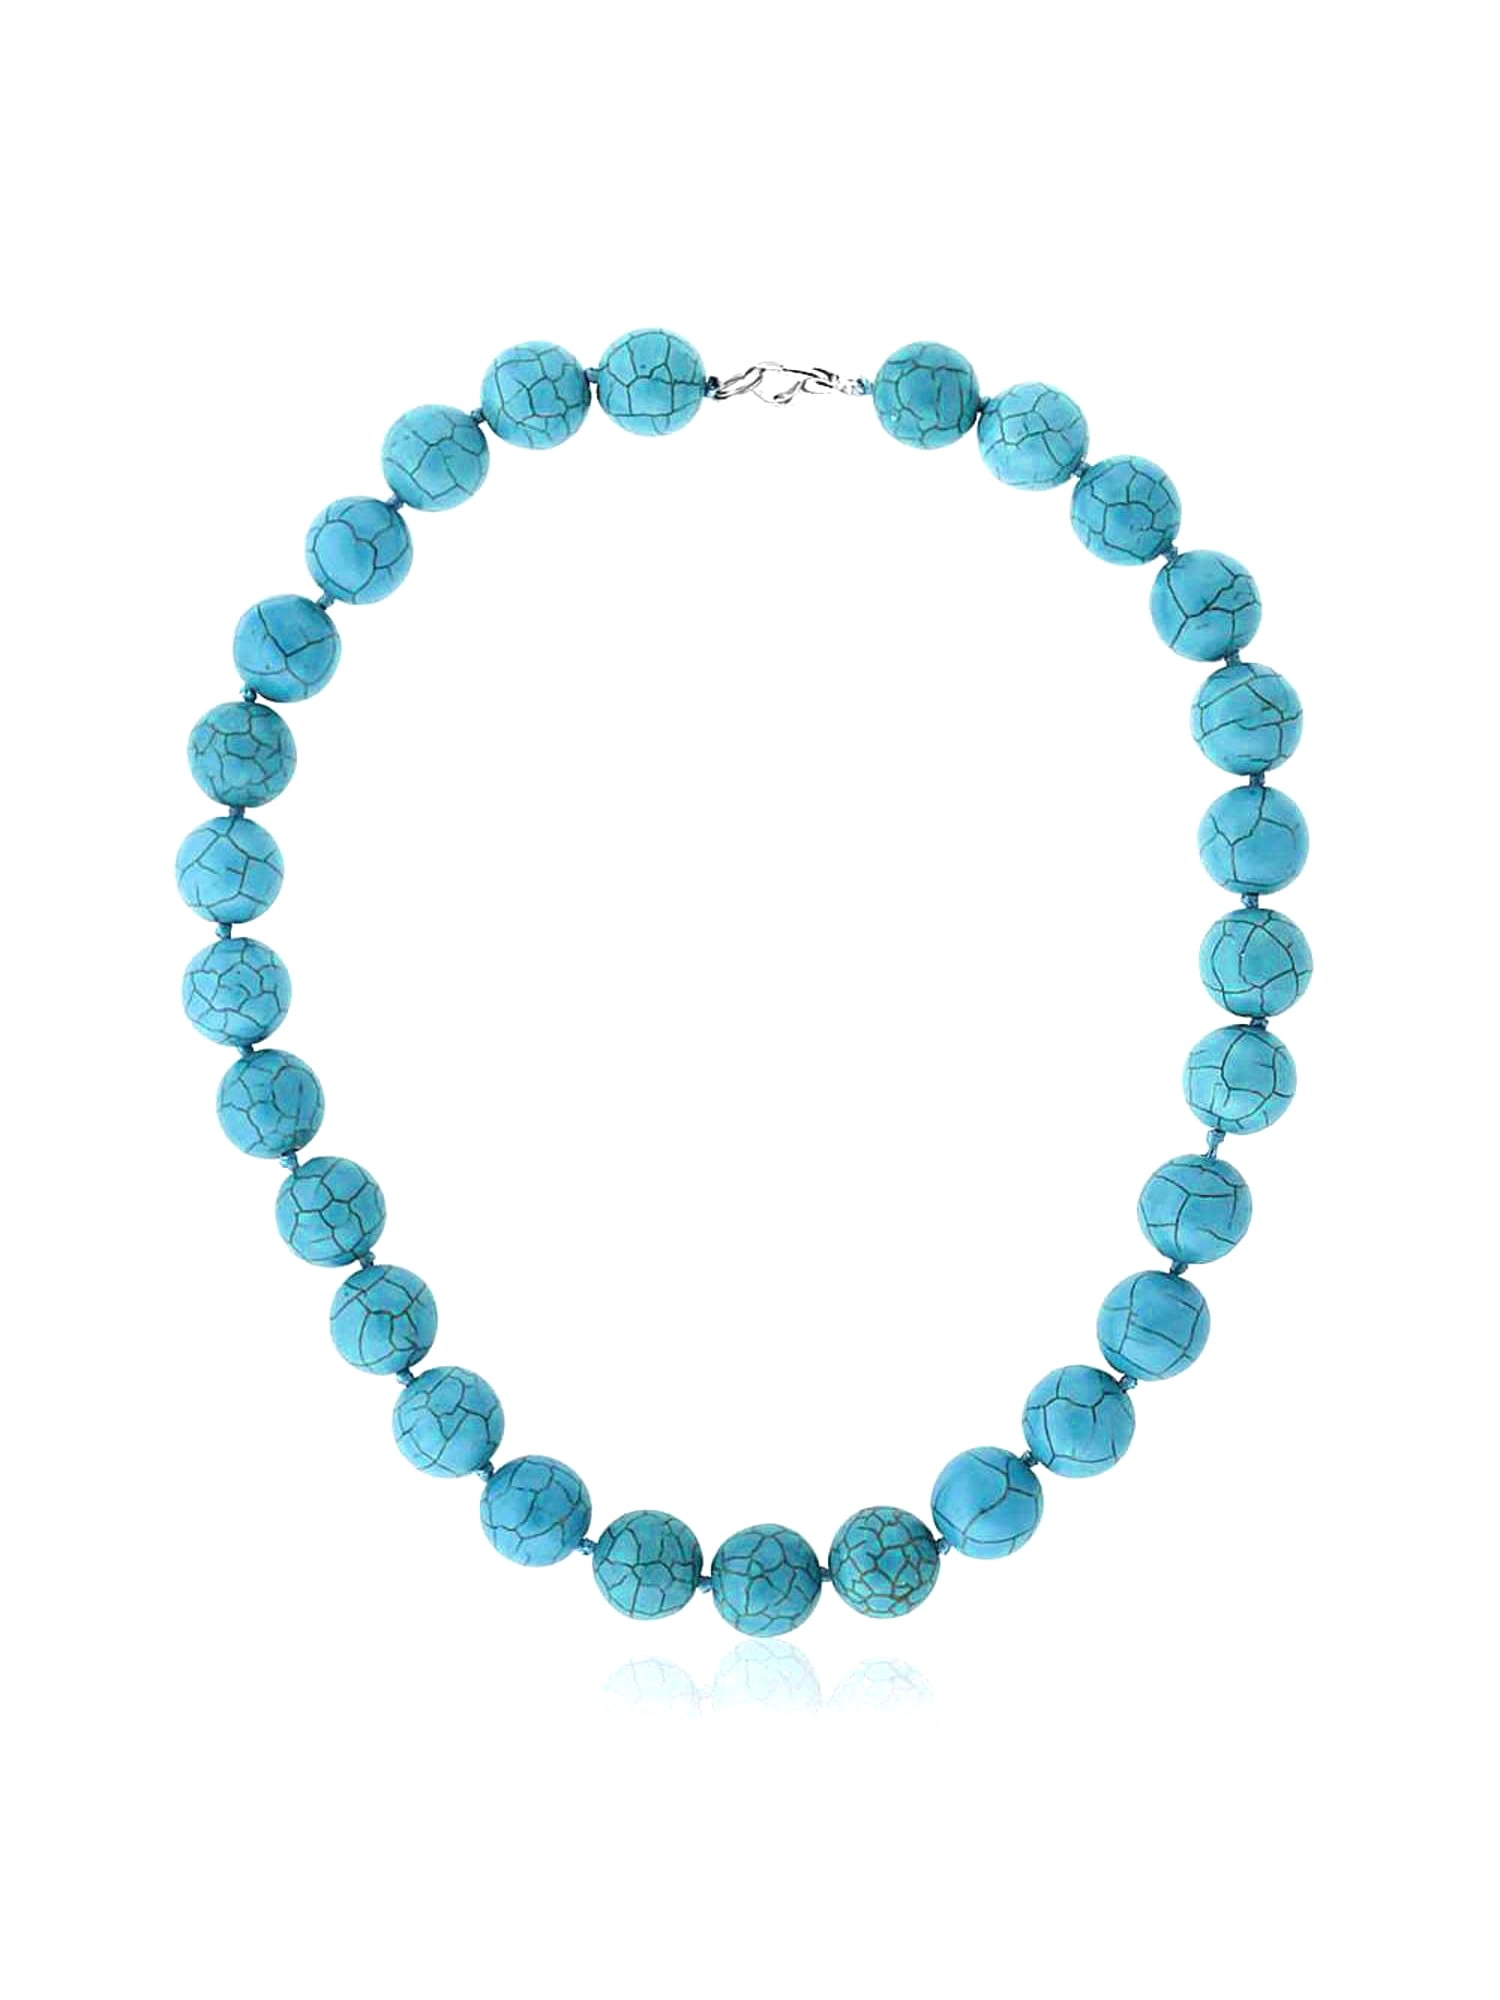 Necklace Choker Bib Graduated Blue Turquoise Beads Silver Tone Chain And Lobster Clasp